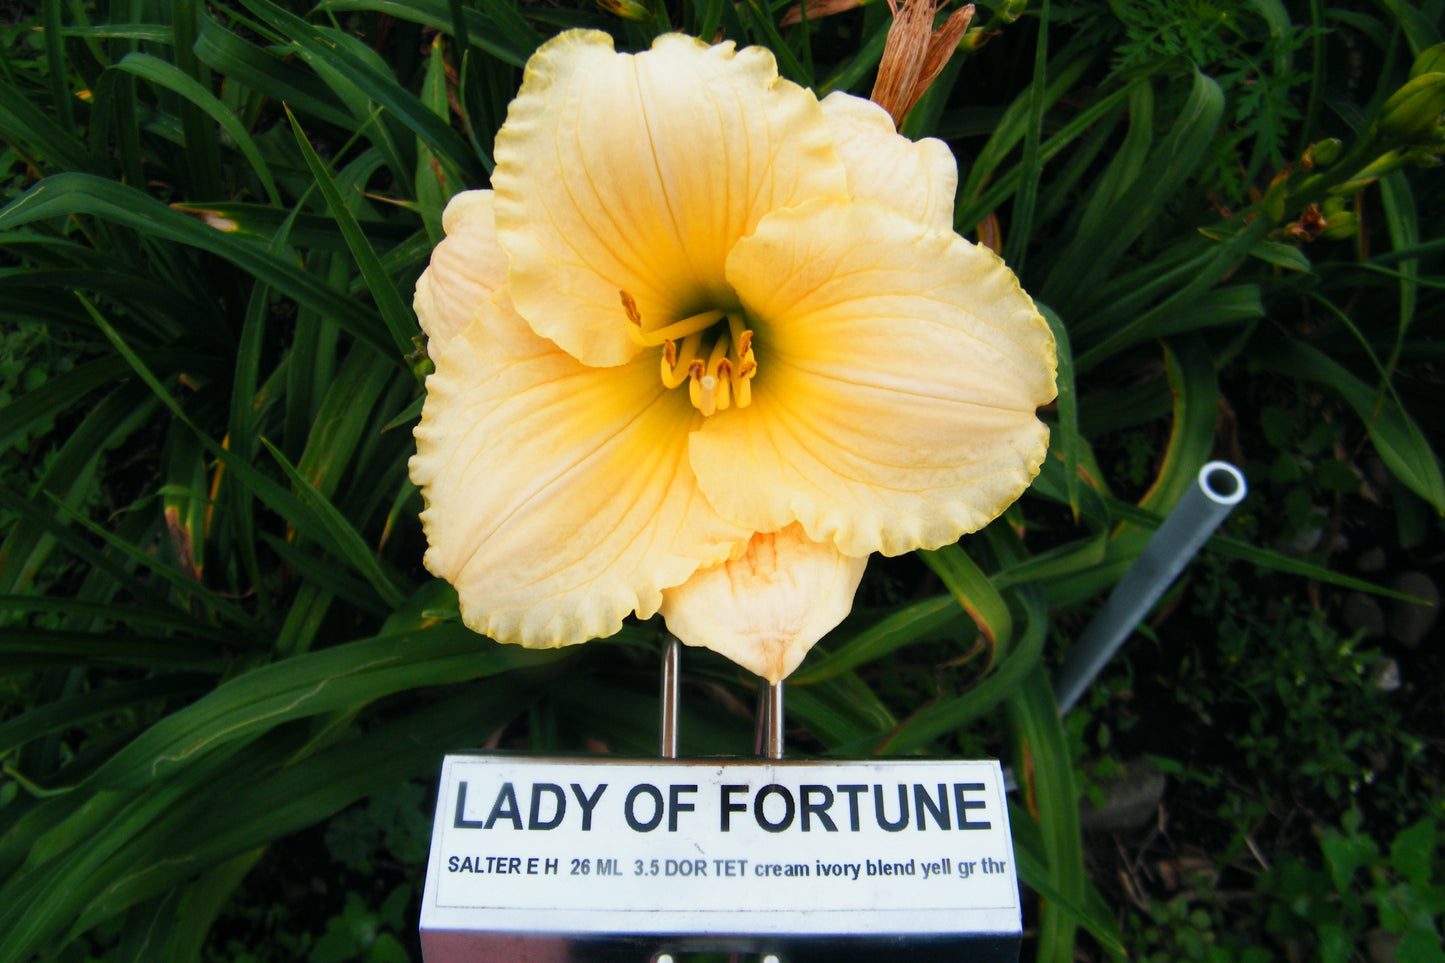 LADY OF FORTUNE